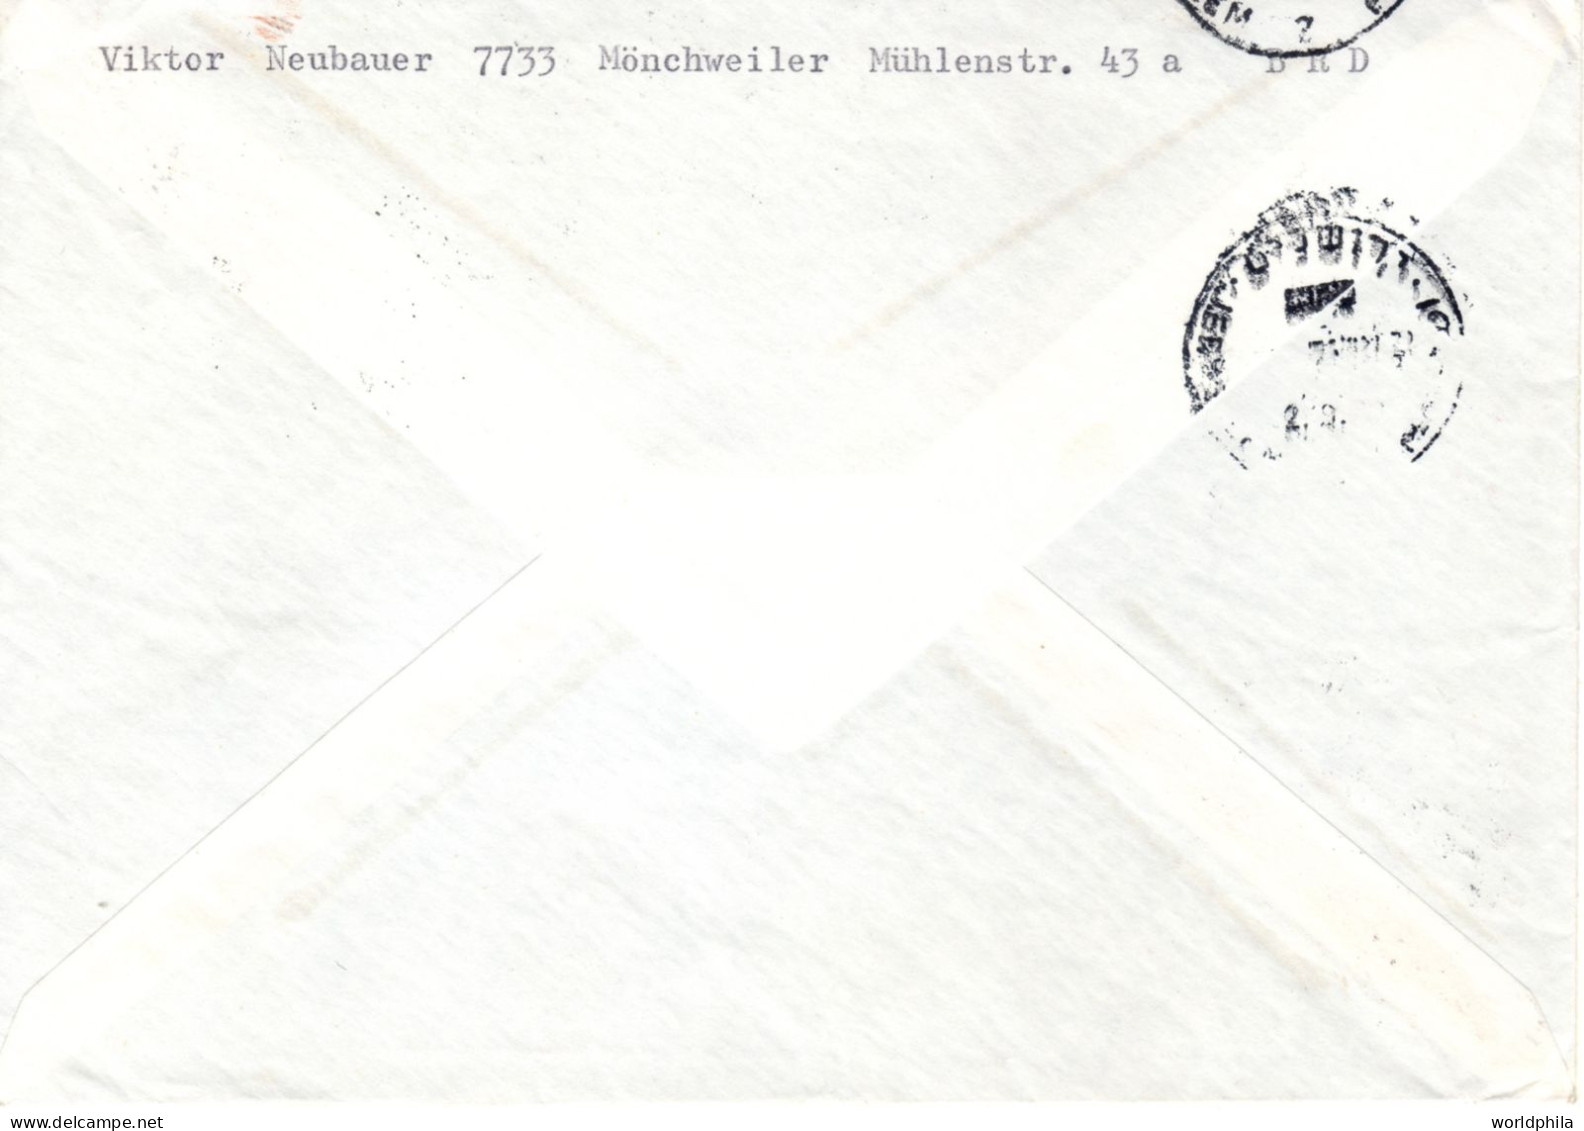 Deutschland To Israel 1972 Olympic Games Mi#624-7 Full Set Registered Mailed Cover IV - Verano 1972: Munich